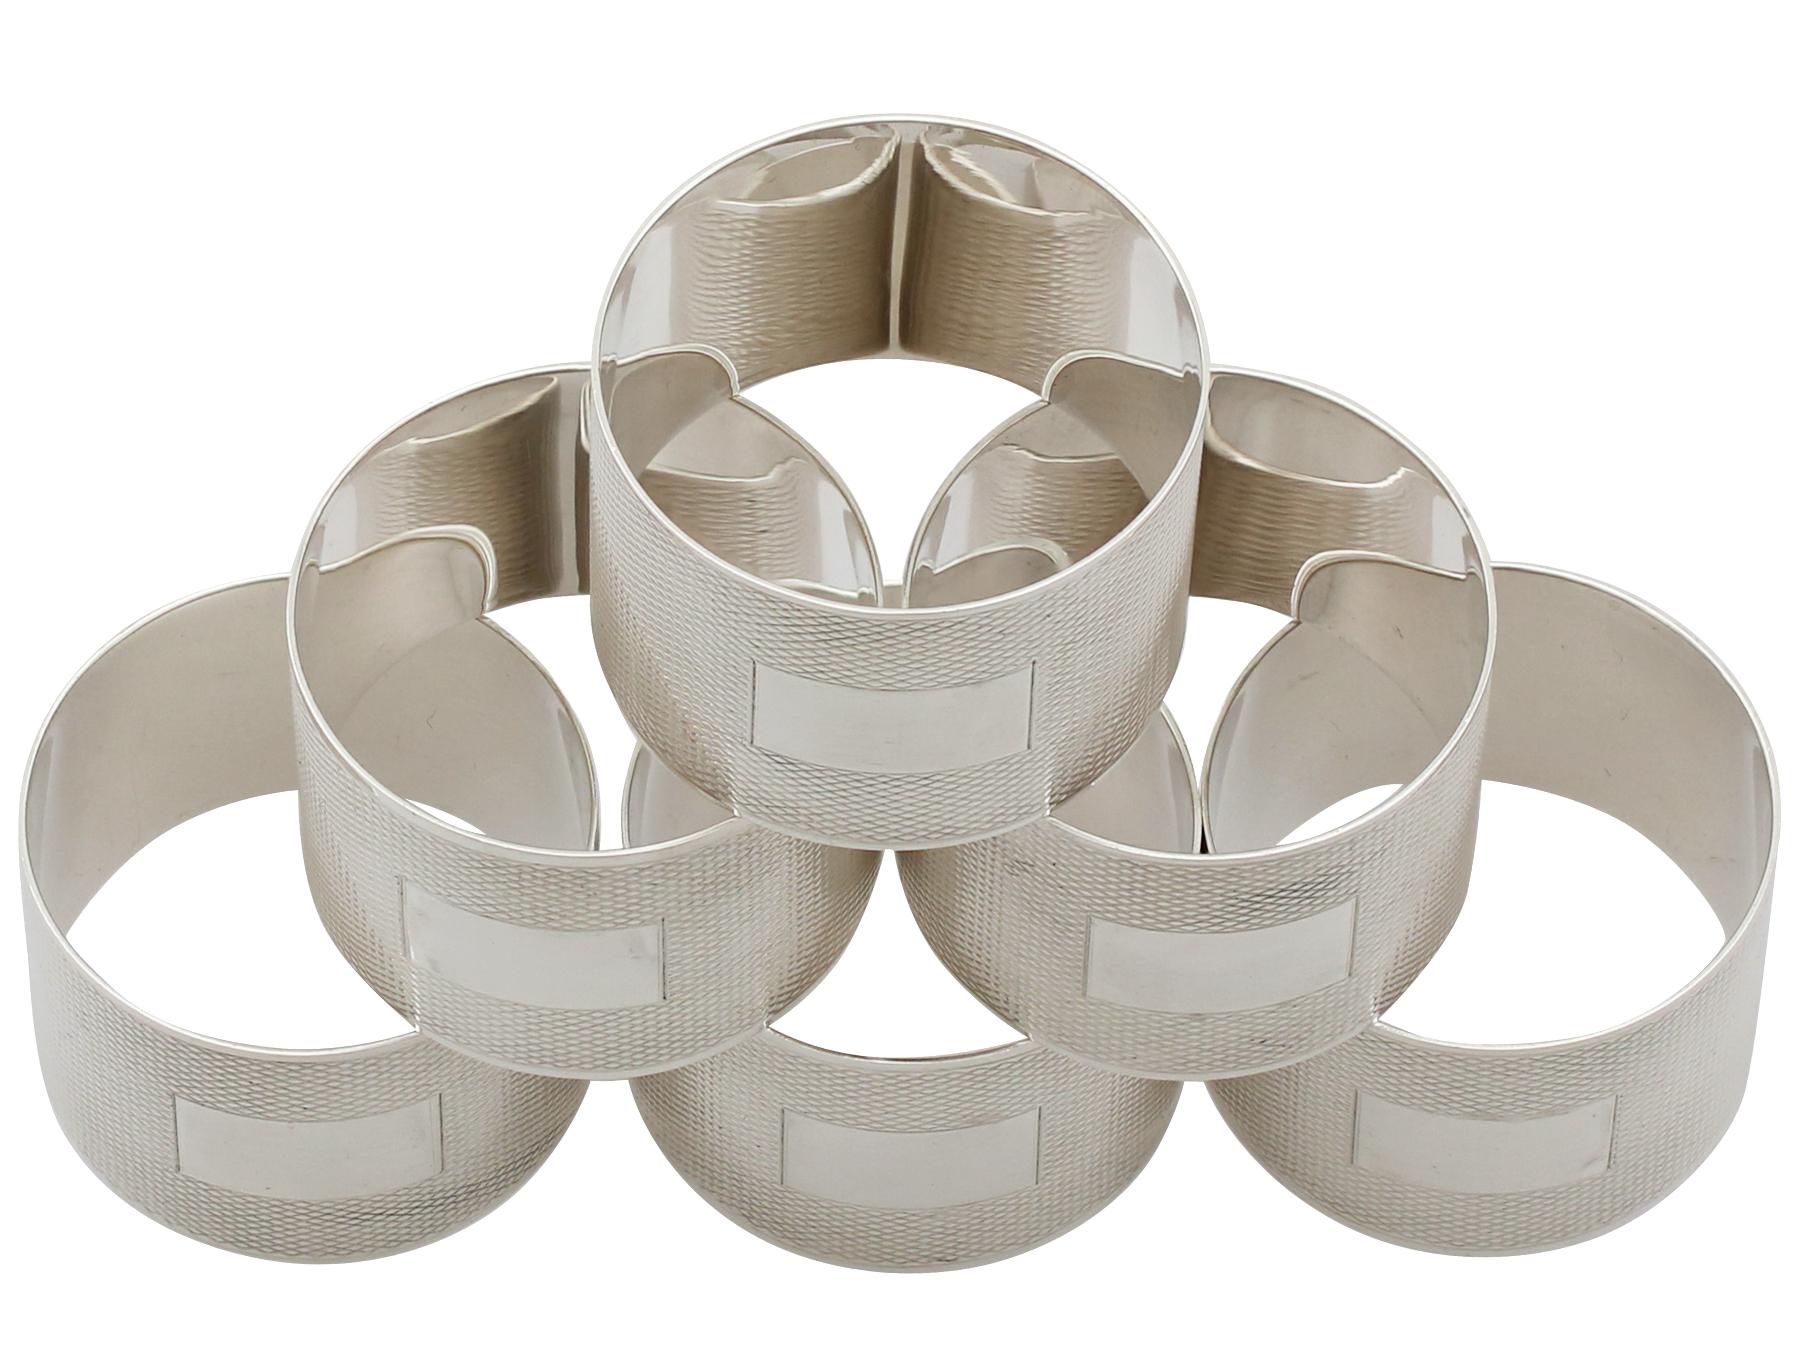 British 1960s Sterling Silver Napkin Rings